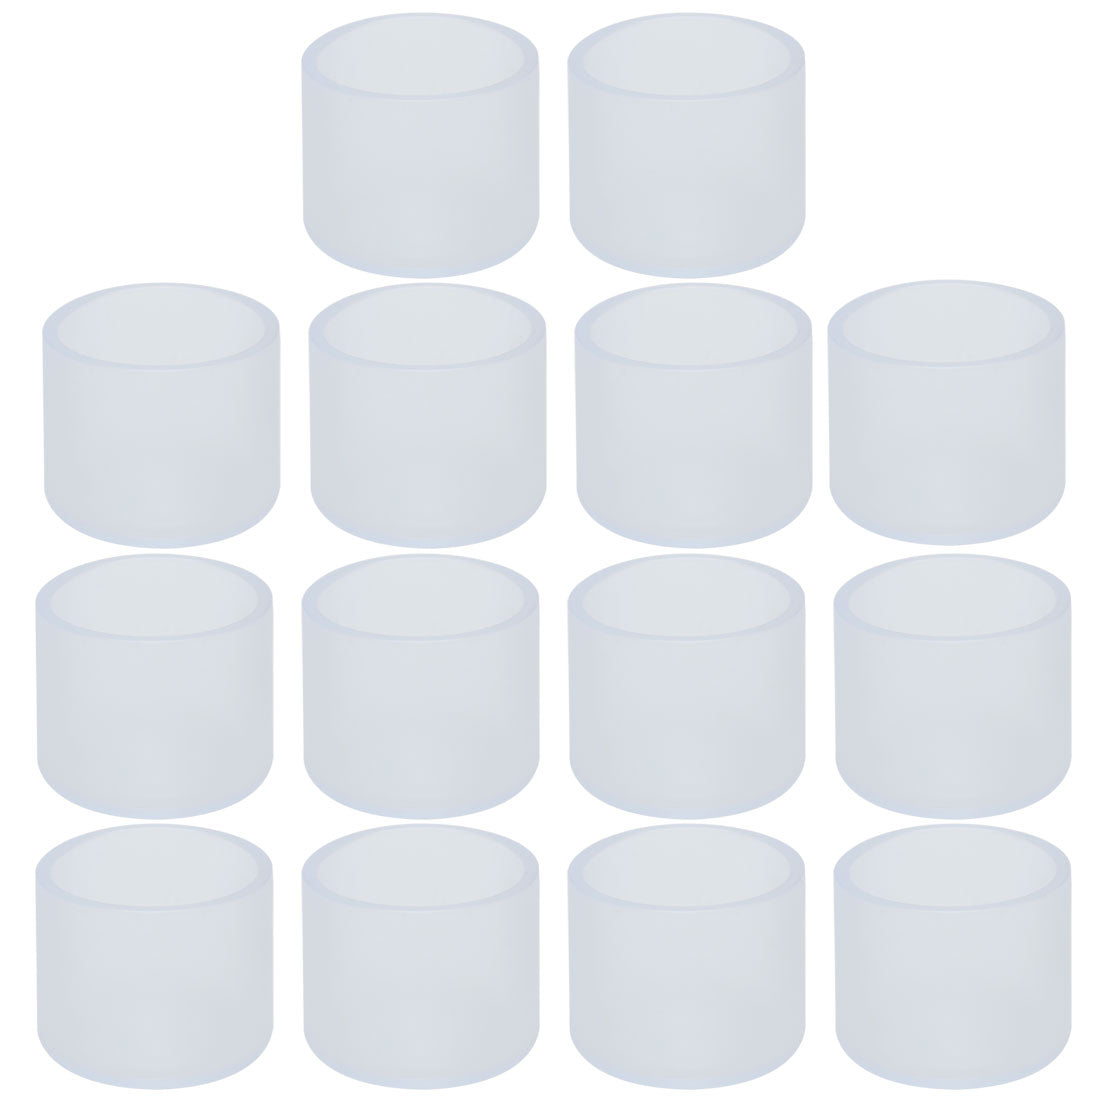 uxcell Uxcell Clear PVC Chair Leg Cap Table Pad Cover Furniture Glide Floor Protector 14pcs